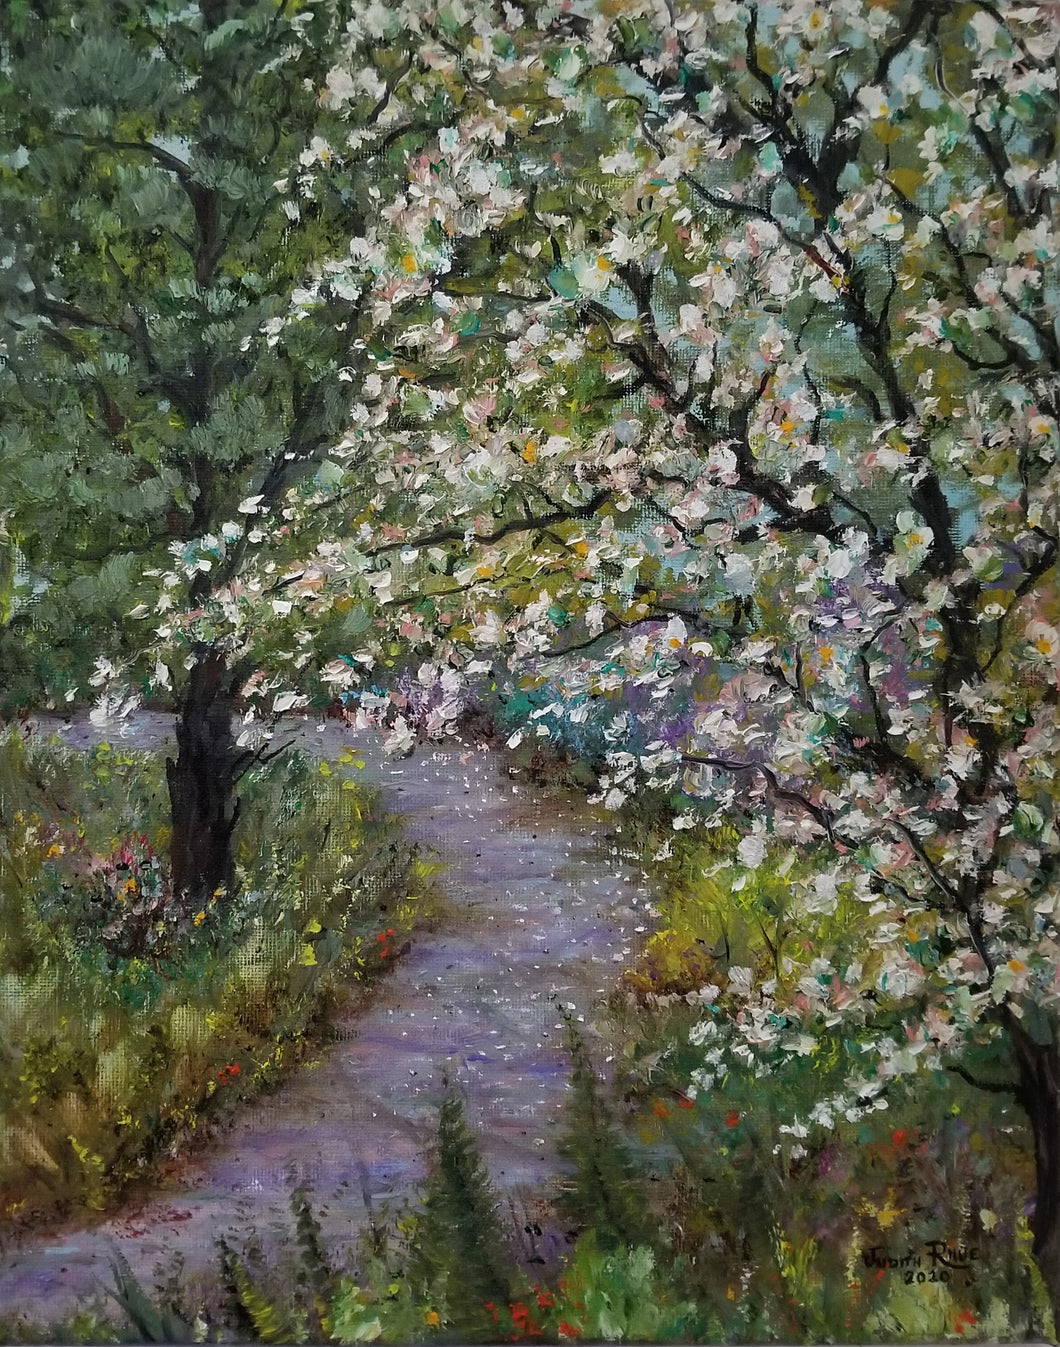 Sunday Stroll - original oil painting, landscape, trees, tree, path, garden, flowers, nature, landscapes, colorful, unique, gift, wall, home, decor, art, US